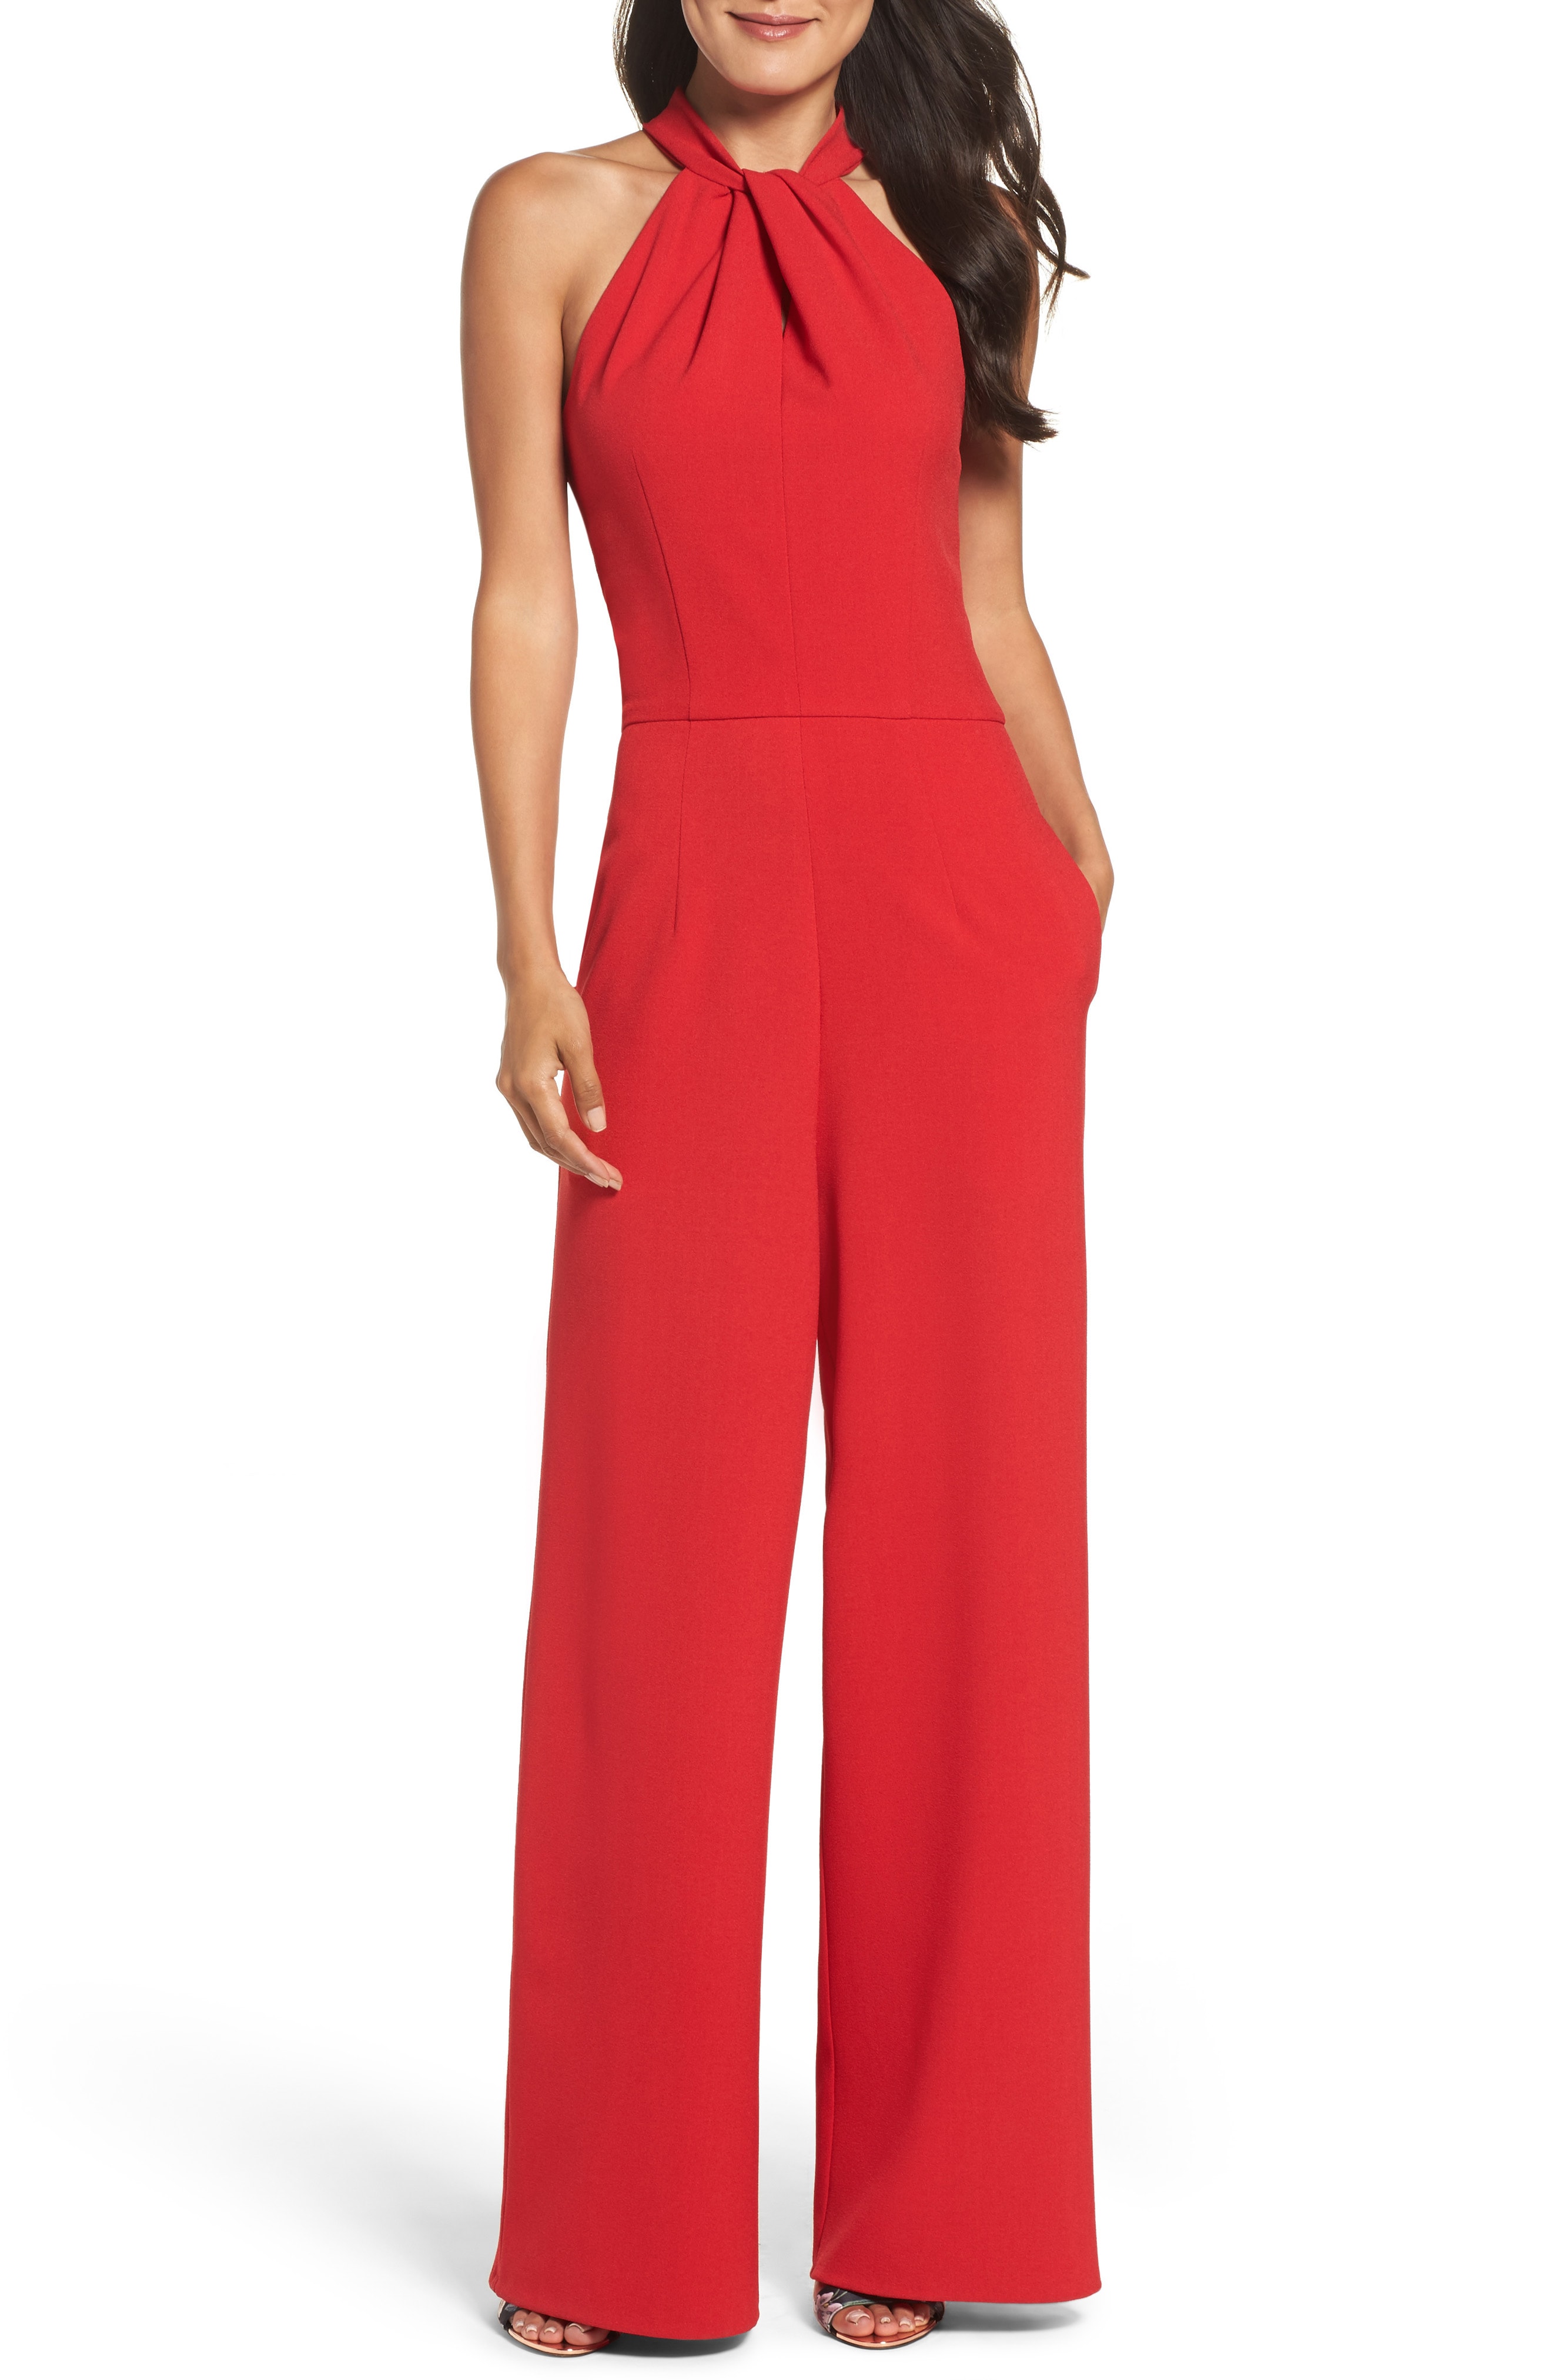 Women's Red Jumpsuits & Rompers | Nordstrom